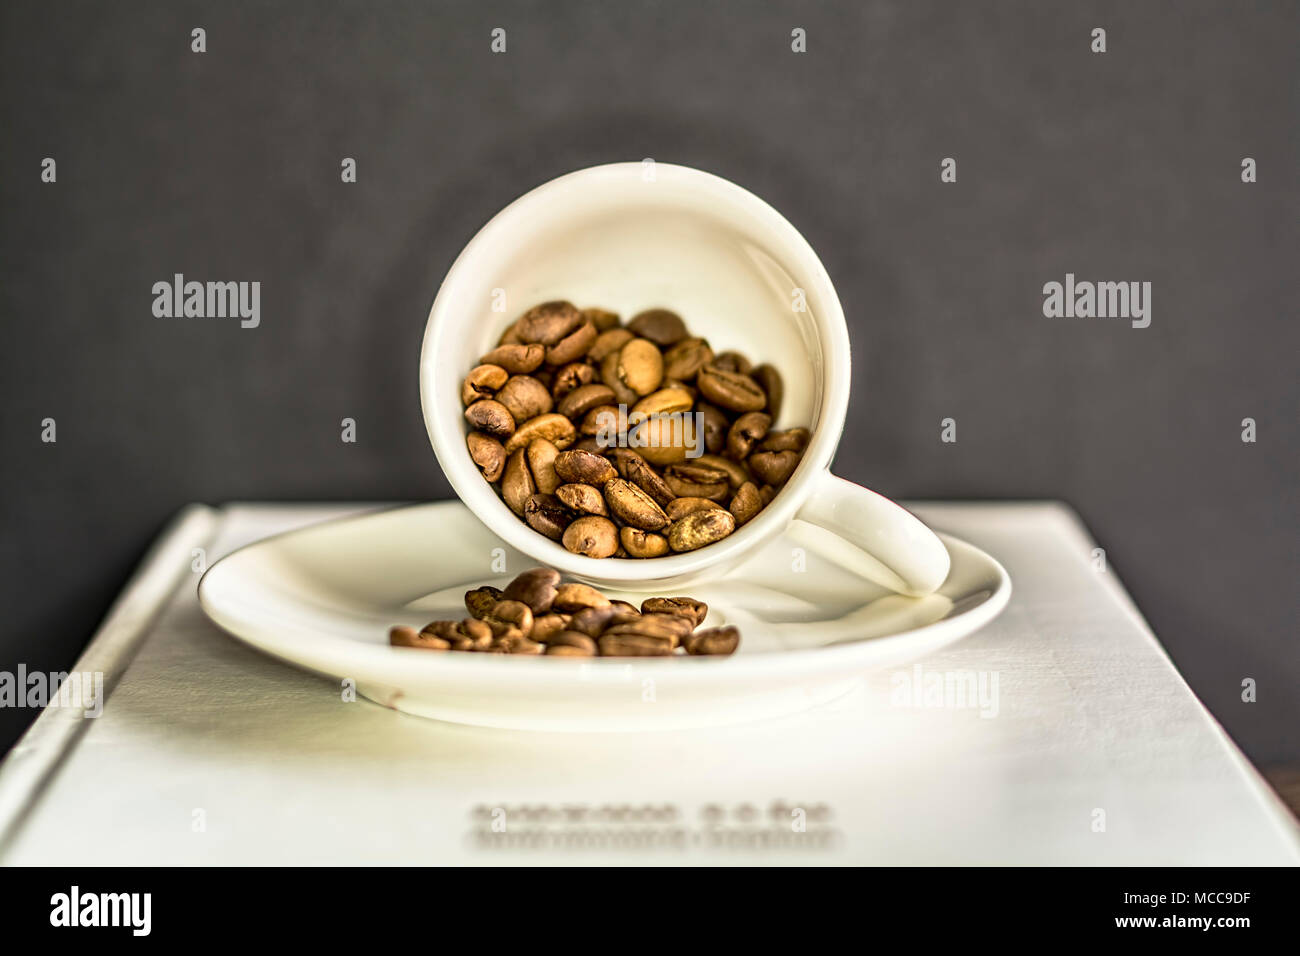 Coffee cup with coffee beans in it on black background. Still life closeup shot. Stock Photo